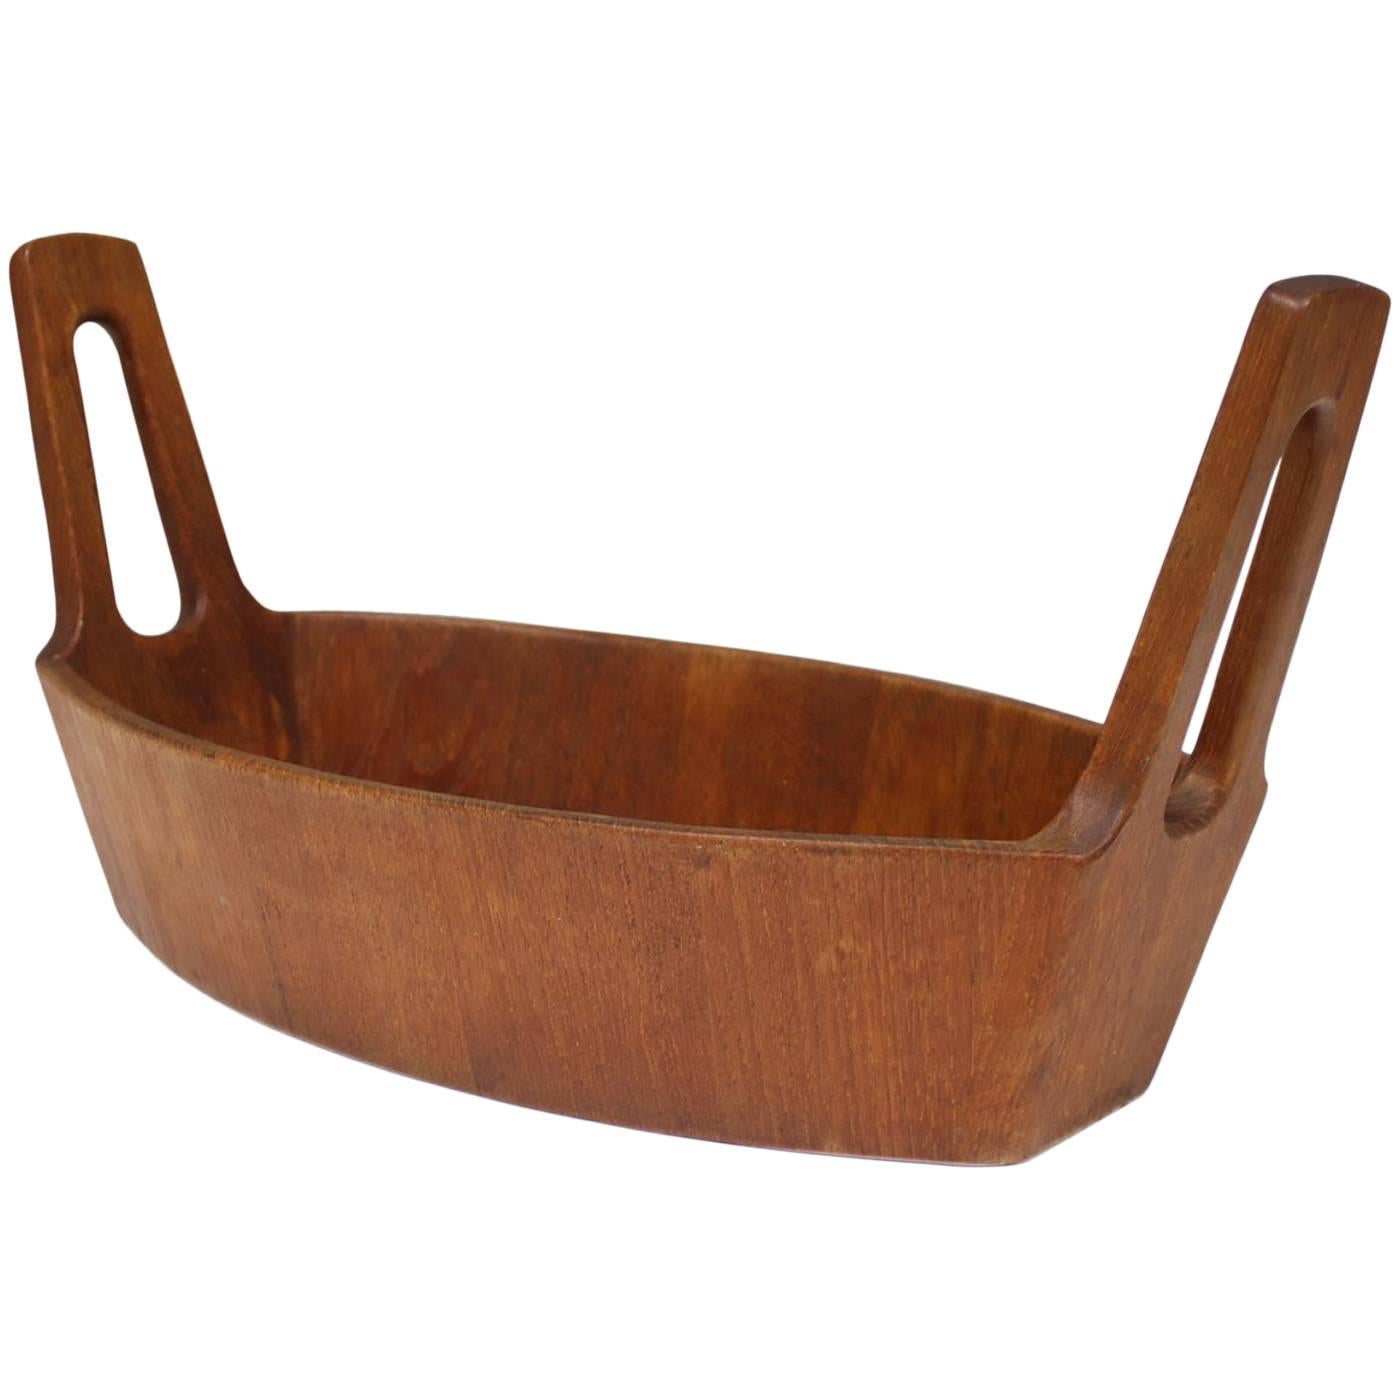 1950s Sculptural Teak Bowl by Anri Form, Italy, Midcentury Italian Modern Design For Sale